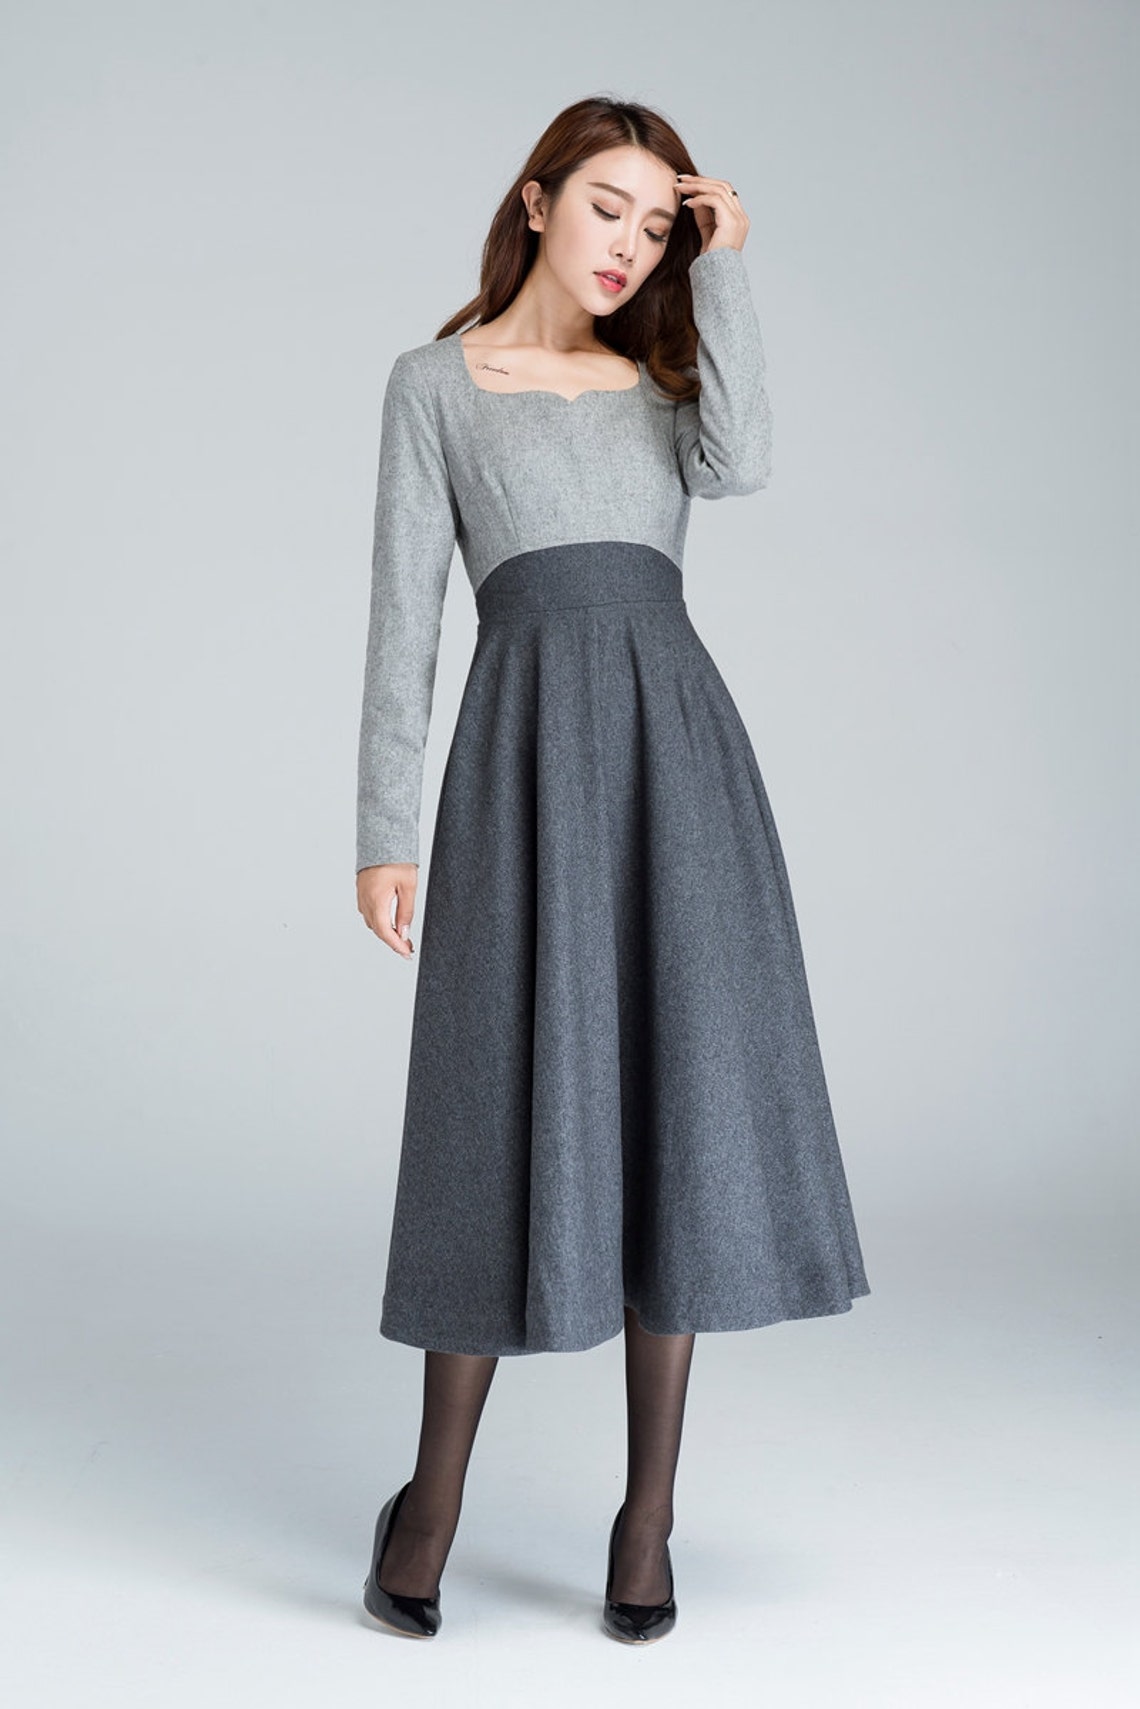 1950s Grey Fit and Flare Wool Dress Womens Dresses Winter - Etsy